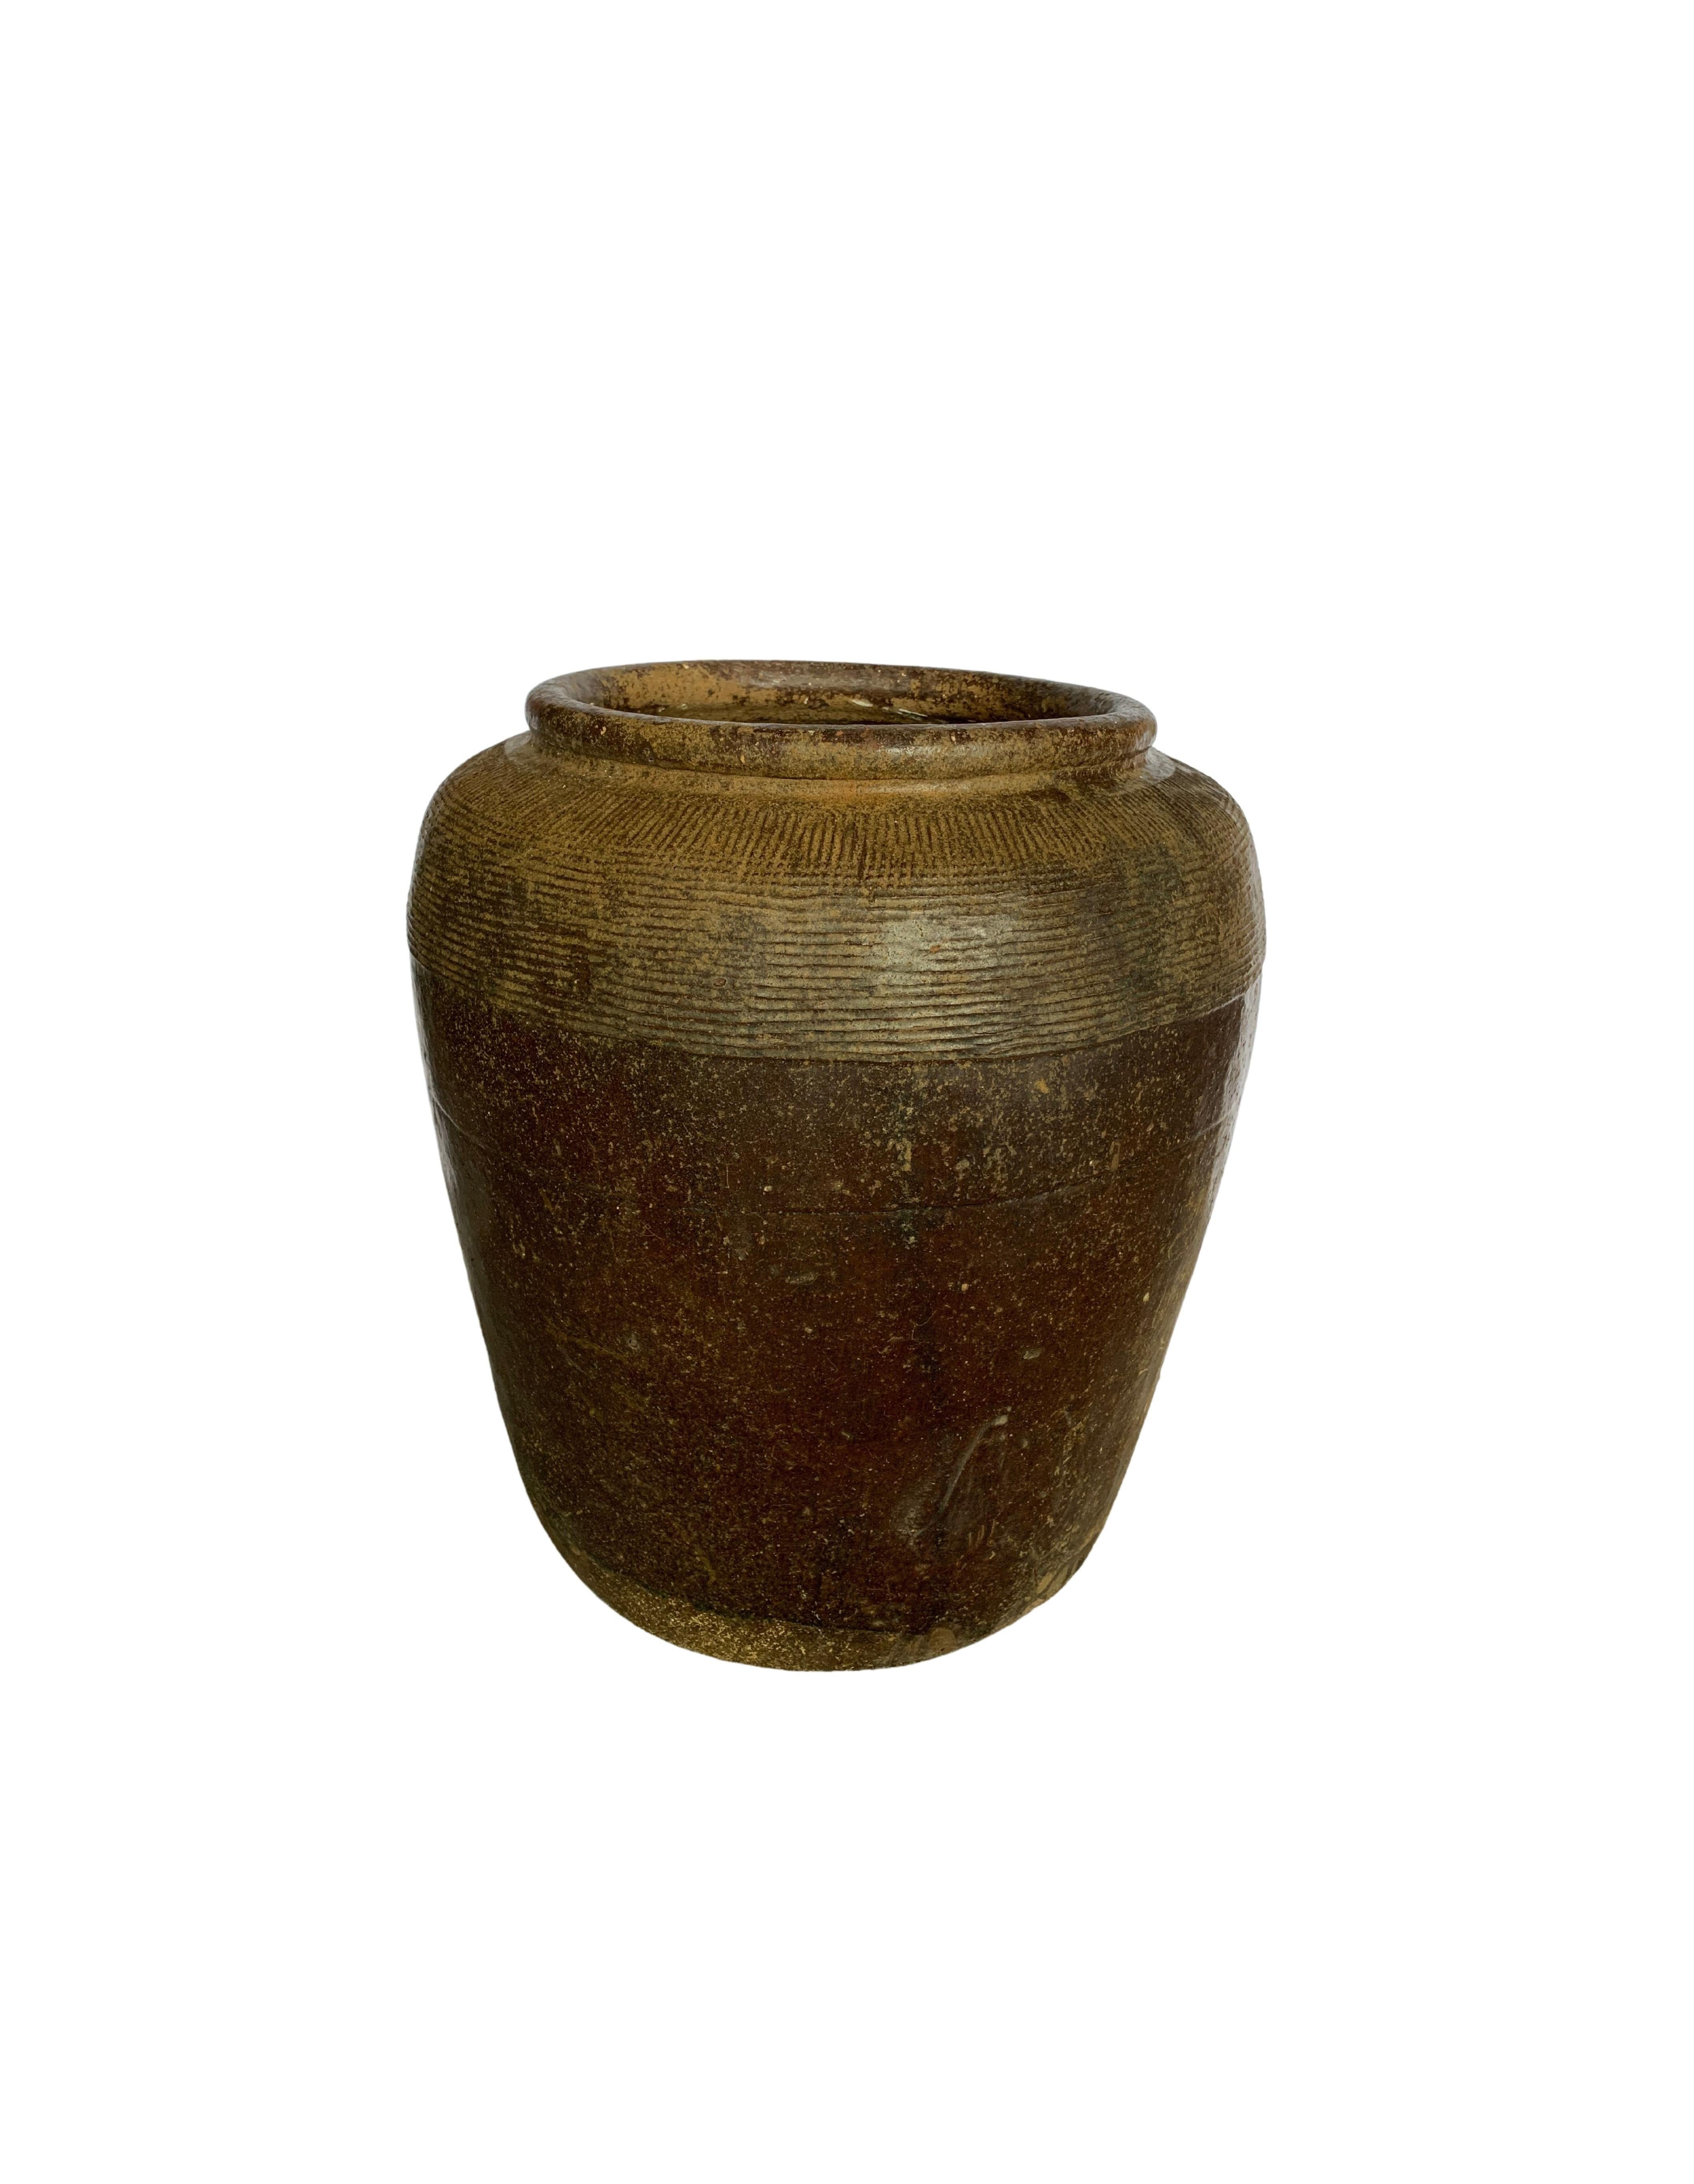 Antique Chinese Brown Glazed Ceramic Salty Egg Jar, c. 1900 In Good Condition For Sale In Jimbaran, Bali